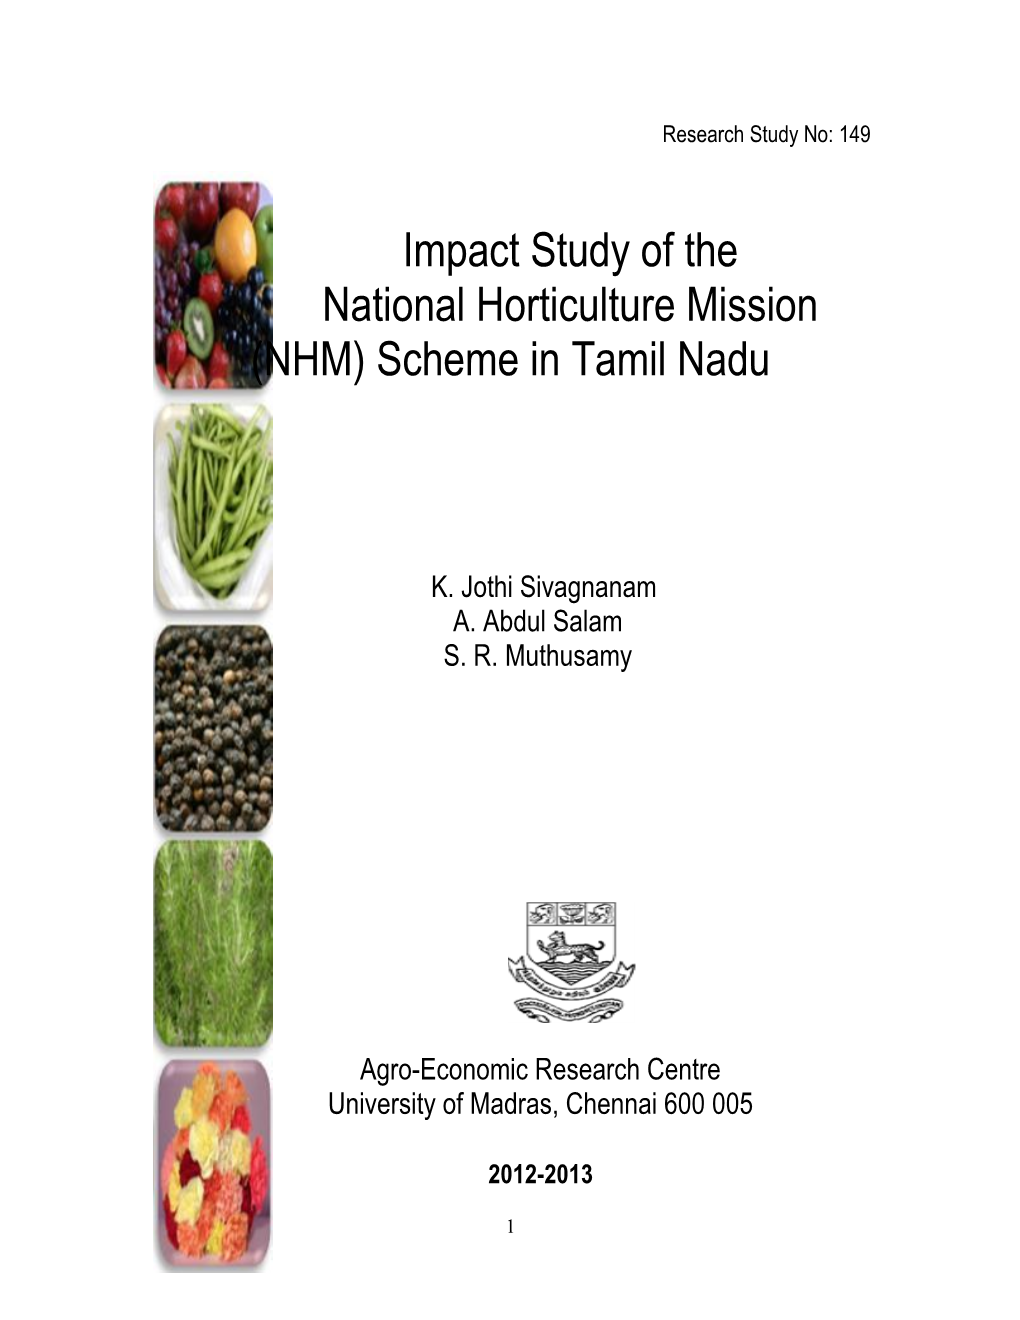 Impact Study of the National Horticulture Mission (NHM) Scheme in Tamil Nadu